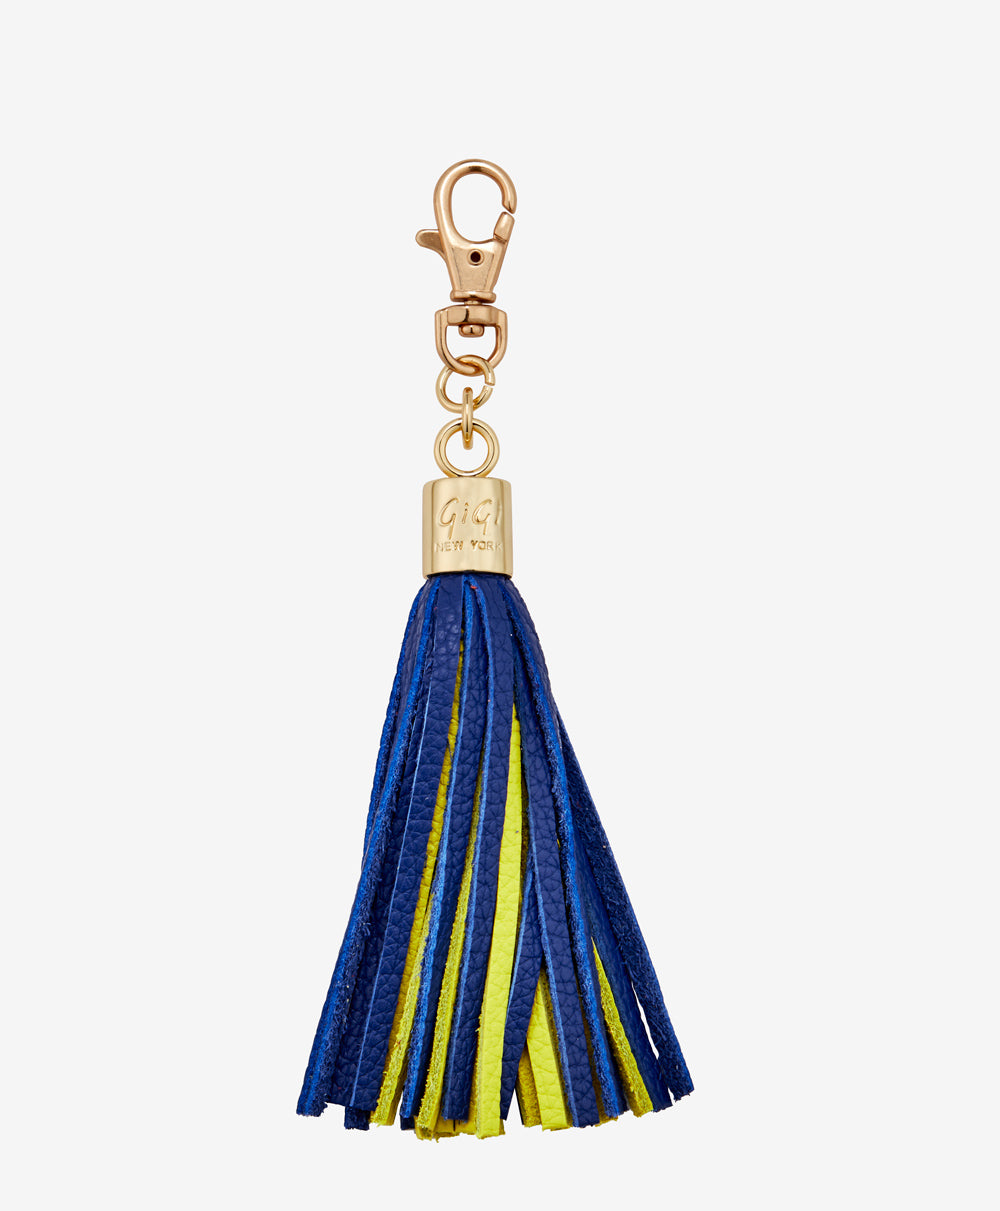 Key and Navy | Gold Chain Leather Tassel Leather